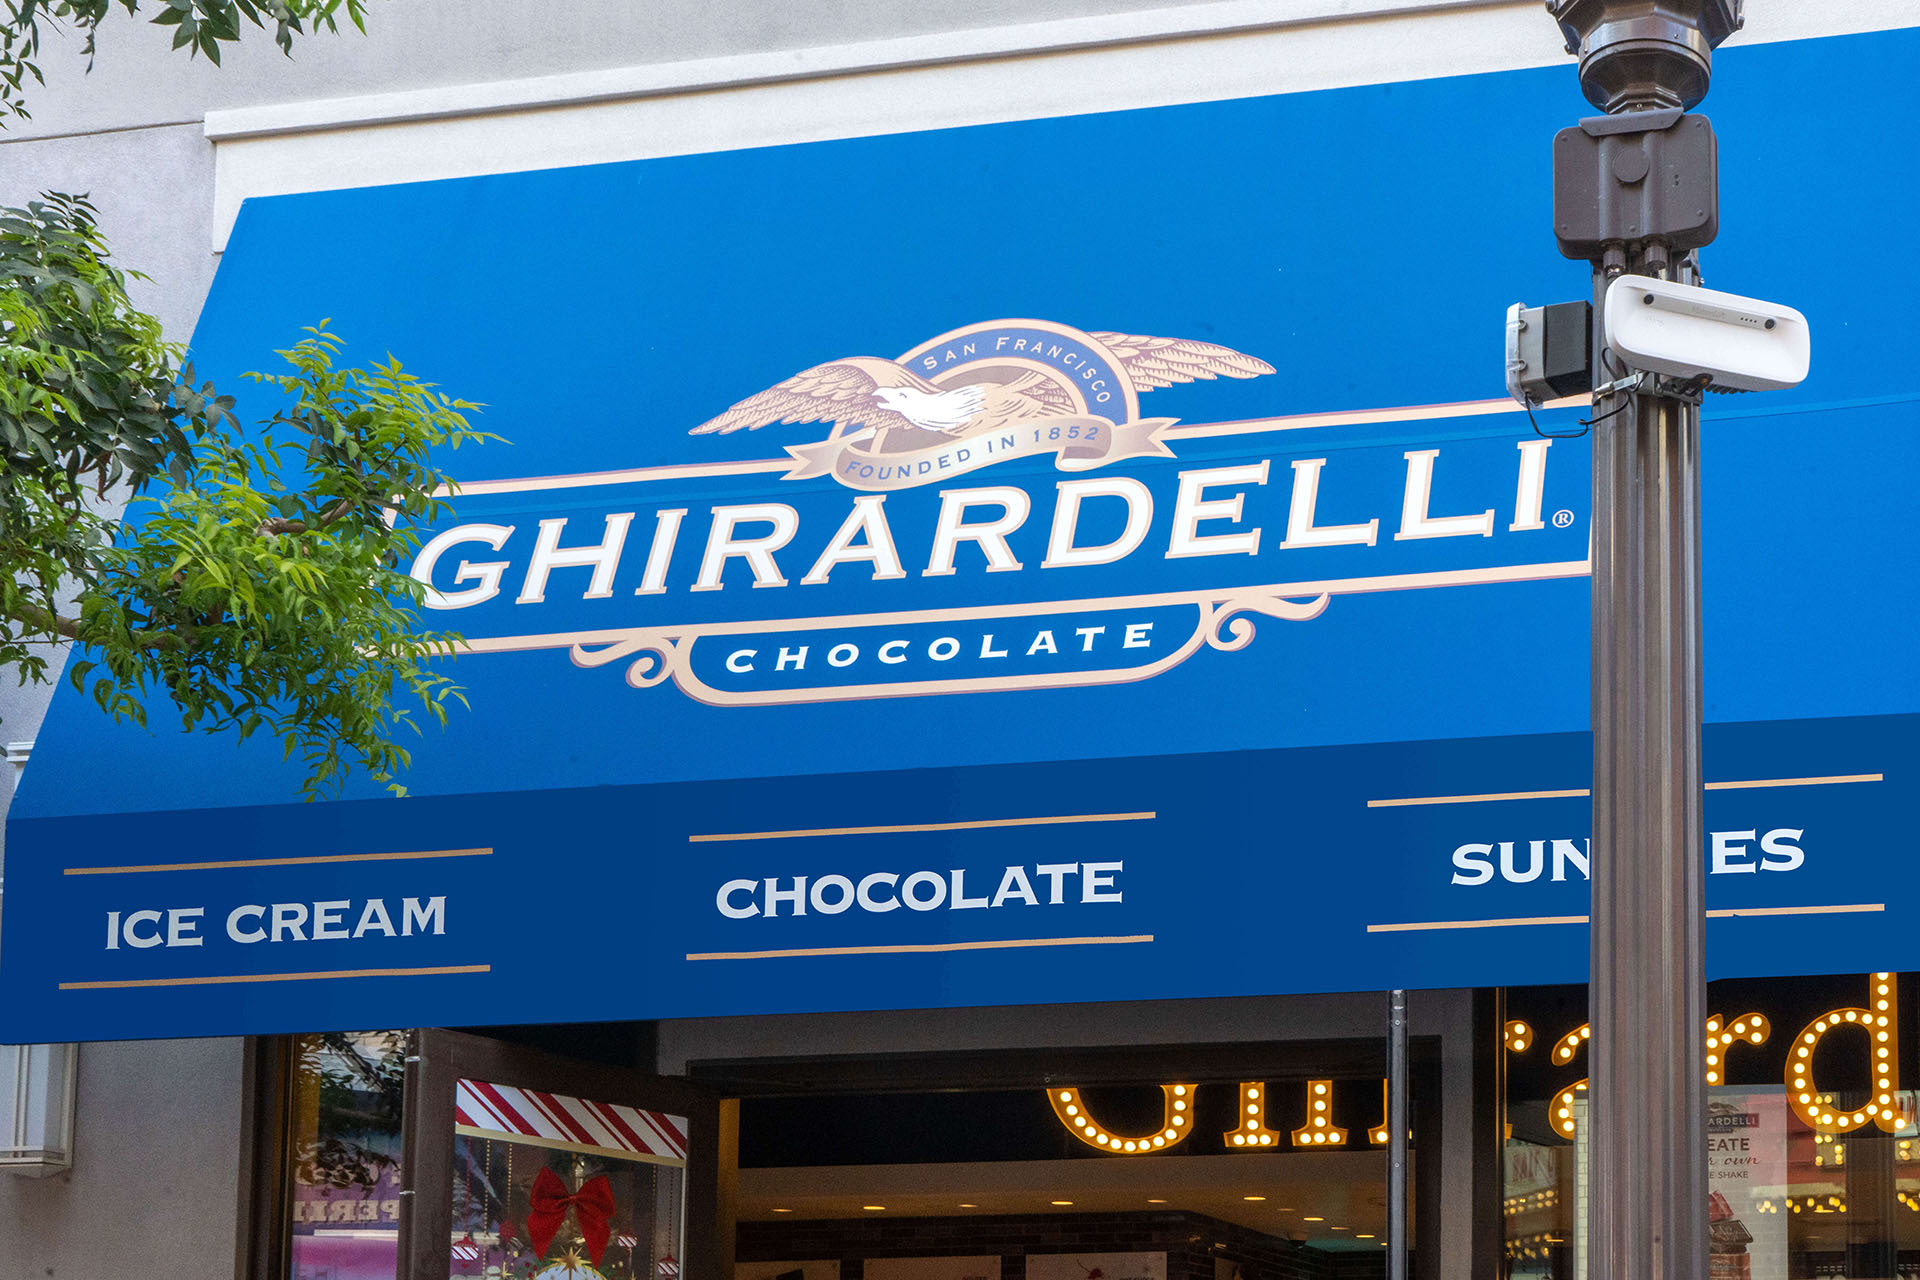 Close-up of Custom Ghirardelli Chocolate Branded Awning System - Designed and Fabricated by Metro Awnings of Las Vegas, Nevada